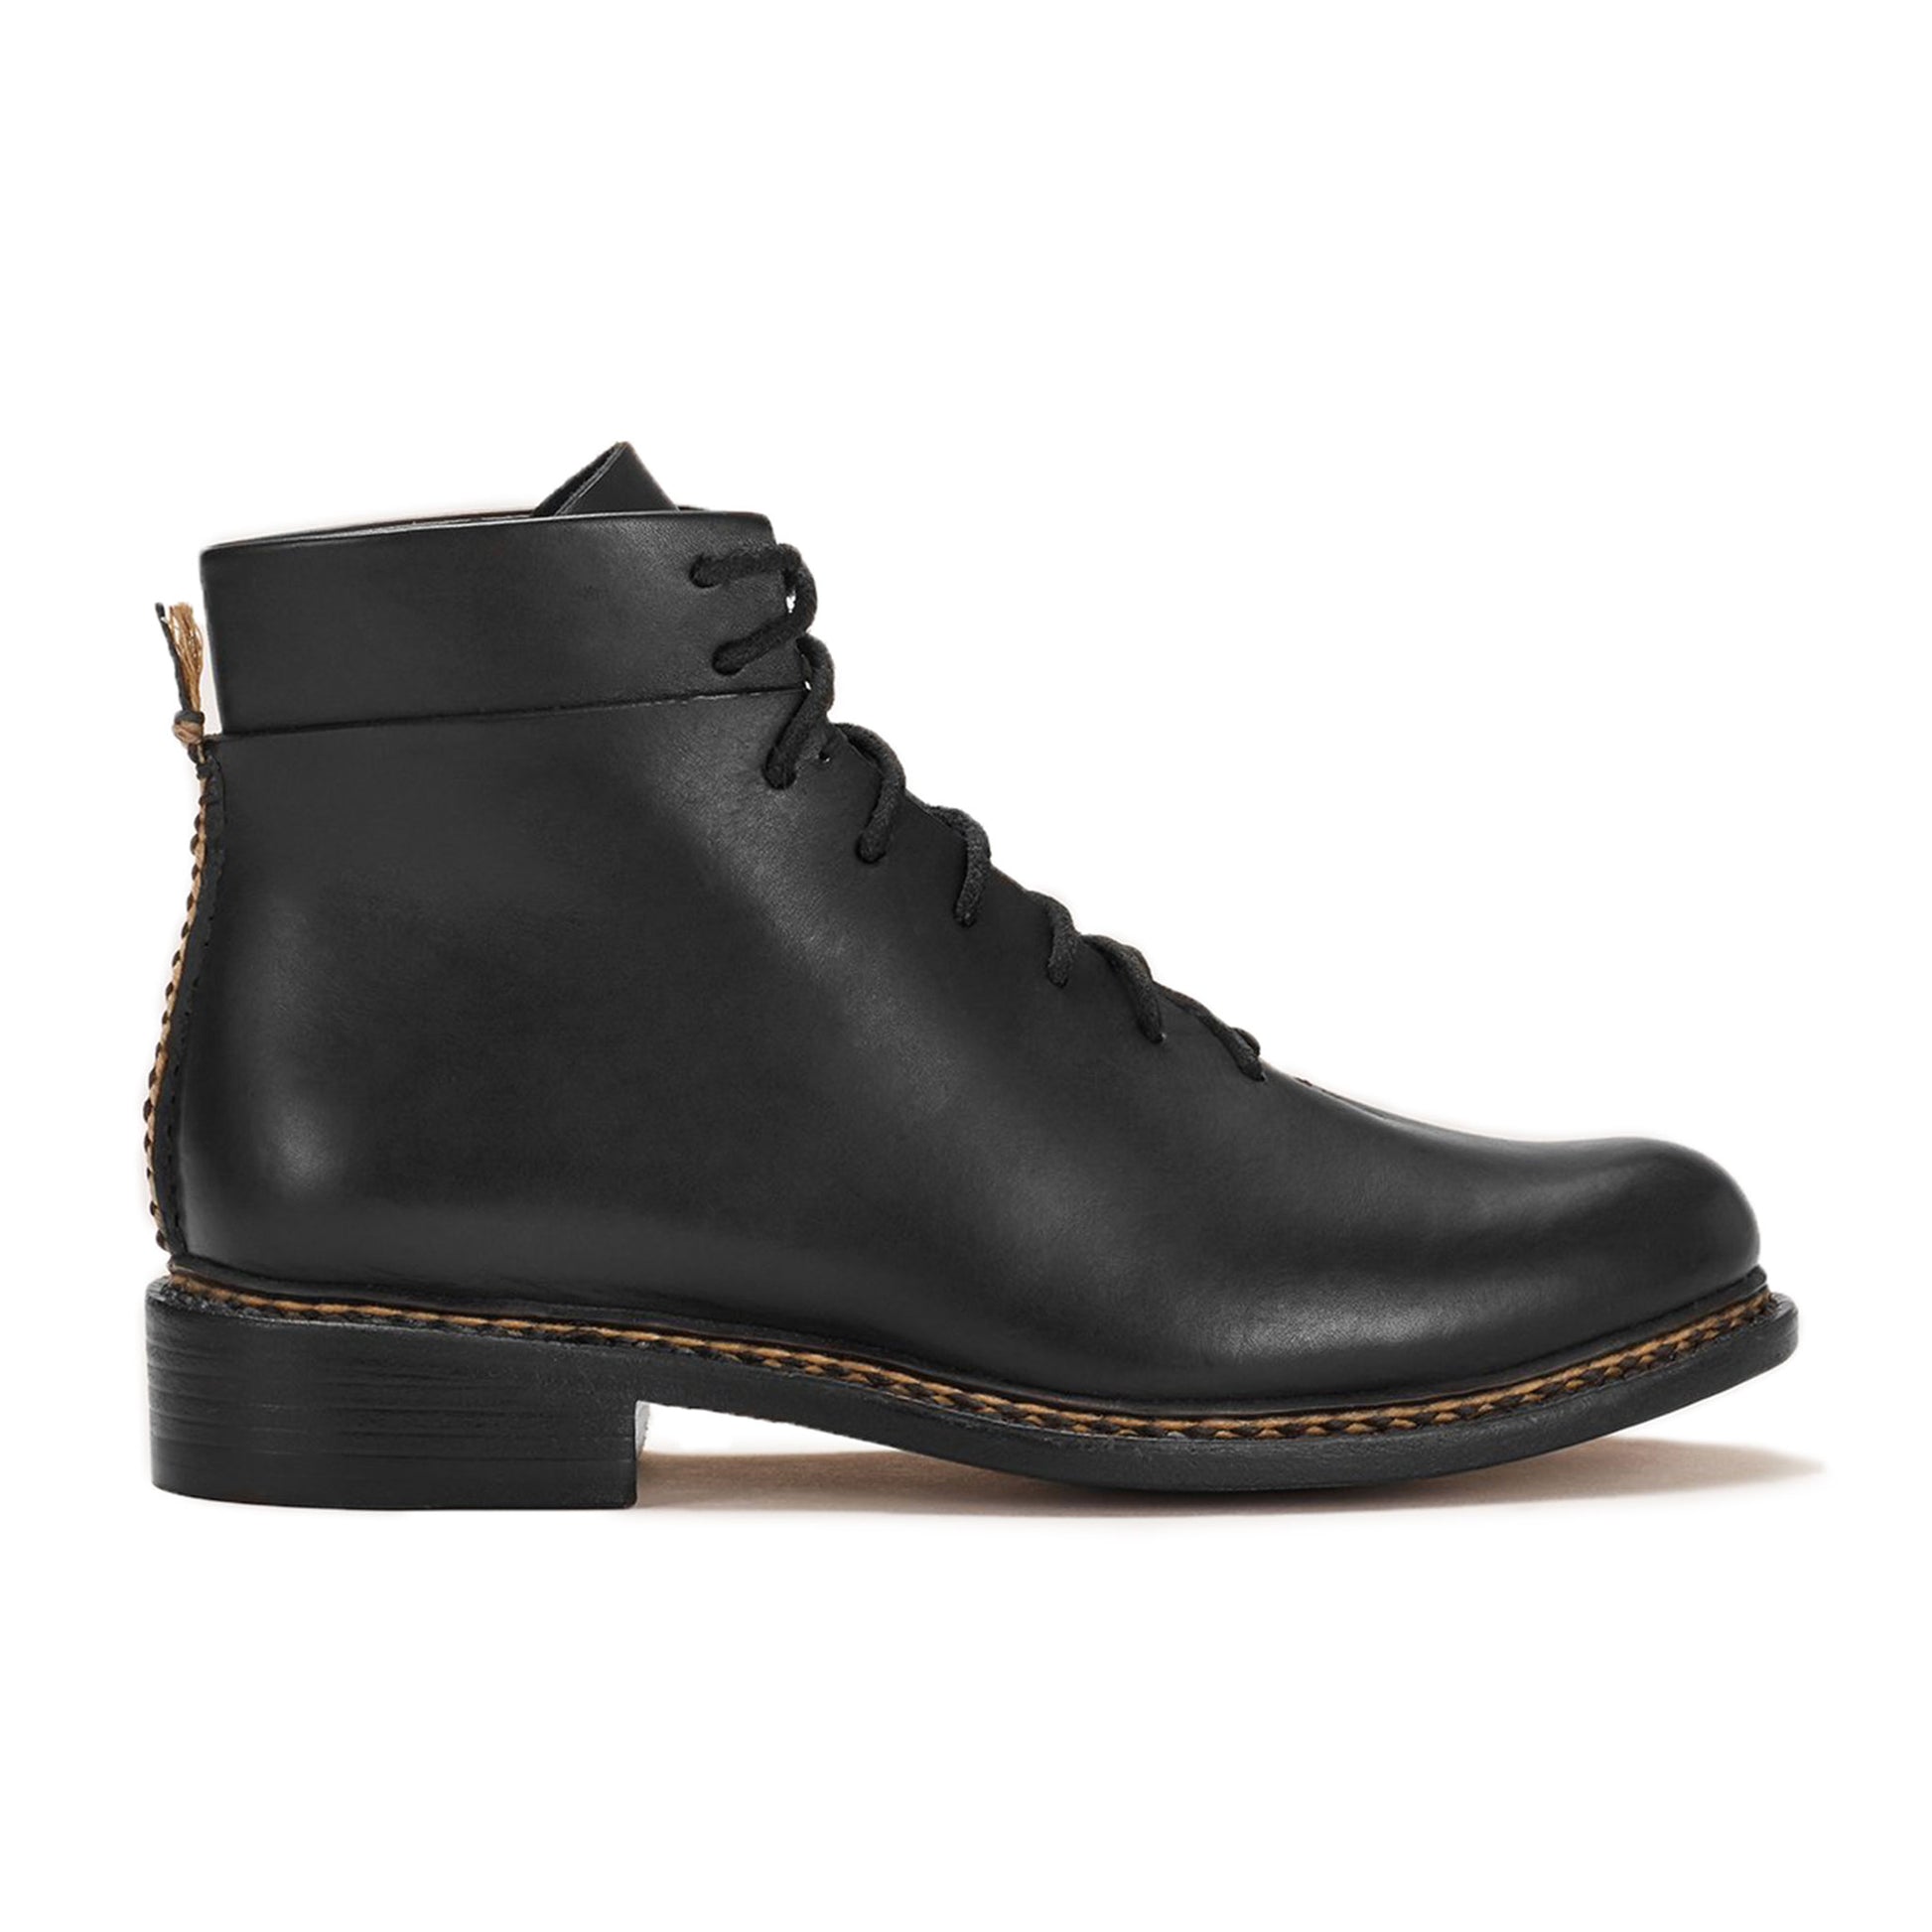 FEIT Braided Lace-Up Boots Footwear Shoes Leather Black Side